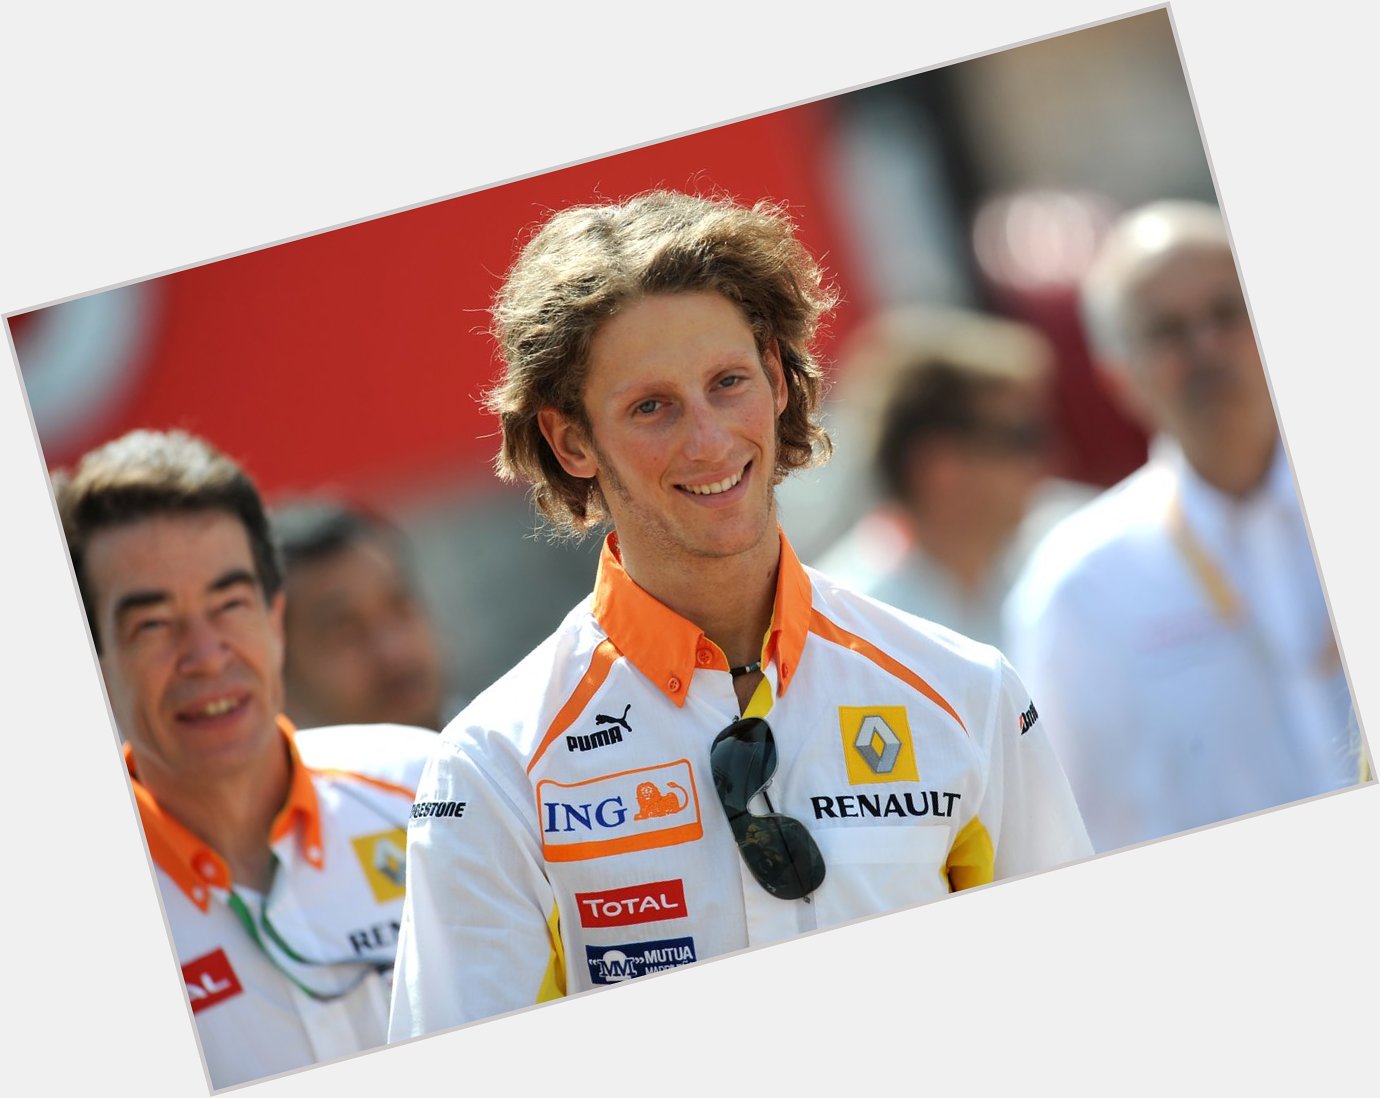 Happy Birthday to Romain Grosjean, who turns 34 today!

Bet this hairstyle has made a comeback during lockdown... 